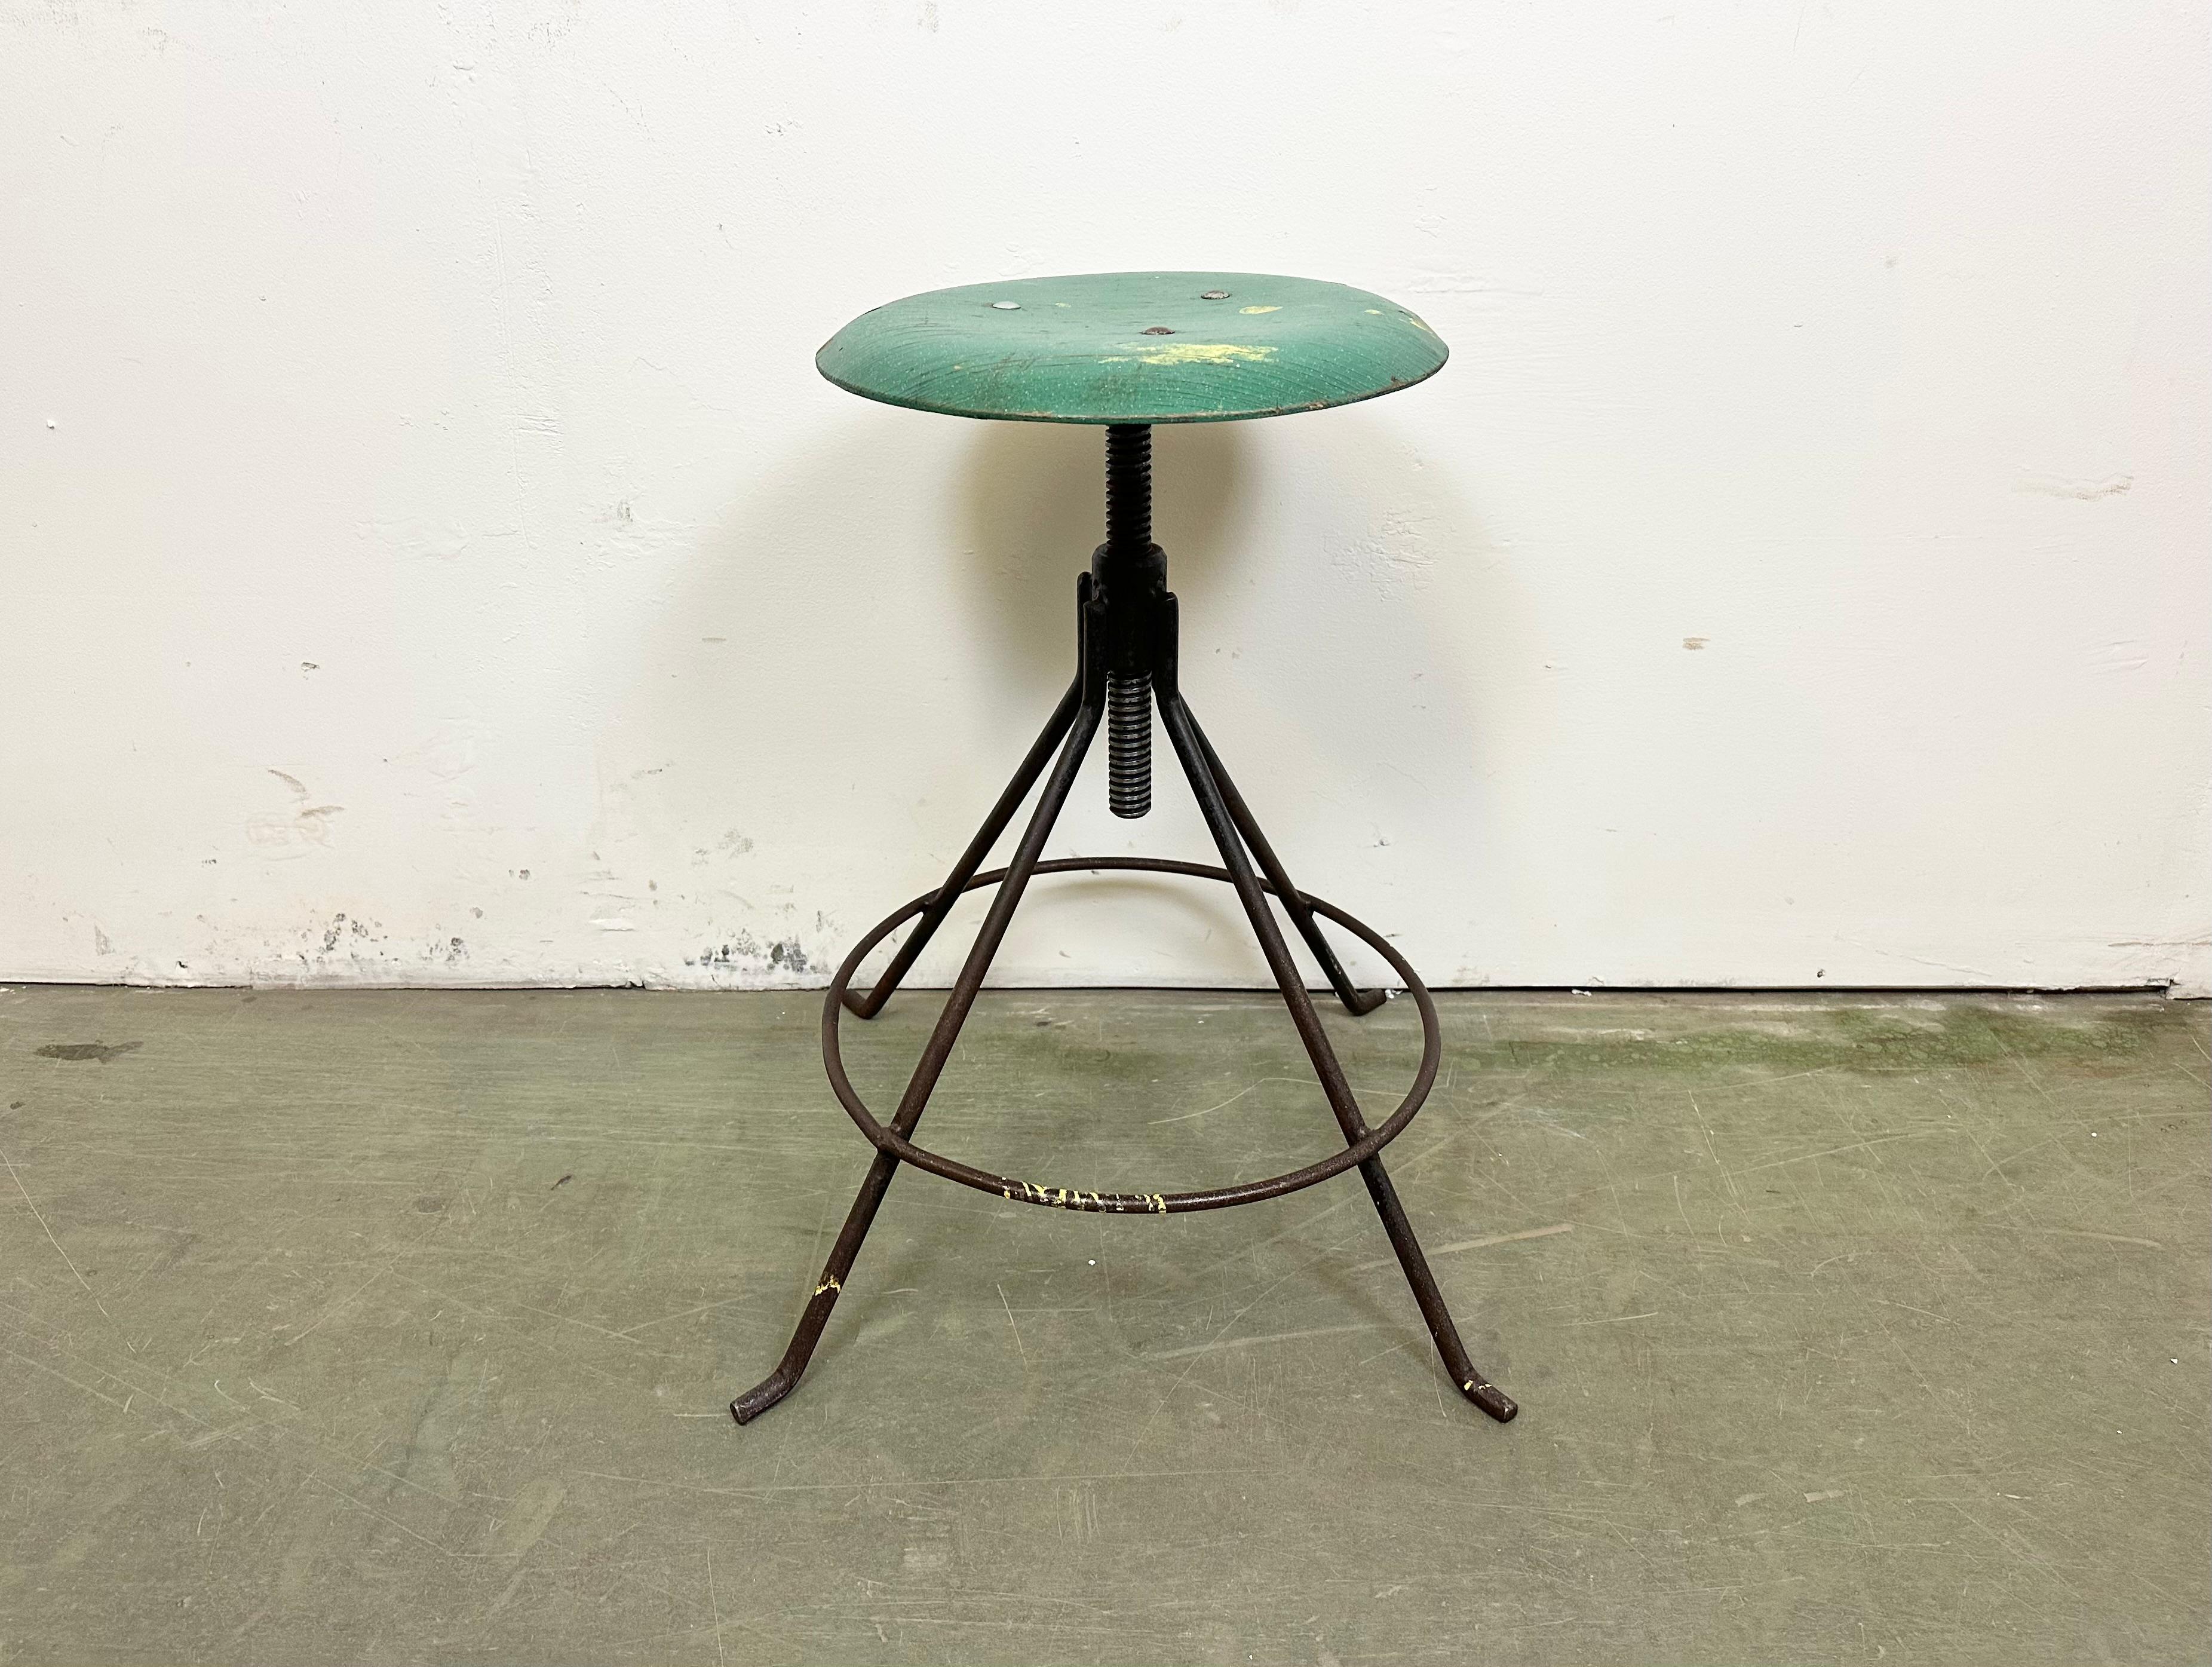 Industrial four-legged height adjustable workshop stool made in Poland during the 1960s.It features a black iron contruction and a green wooden (plywood) seat.
Measures: Min.- Max. seat height: 47 cm - 68 cm.
Seat diameter: 35 cm.
Weight: 6,3 kg